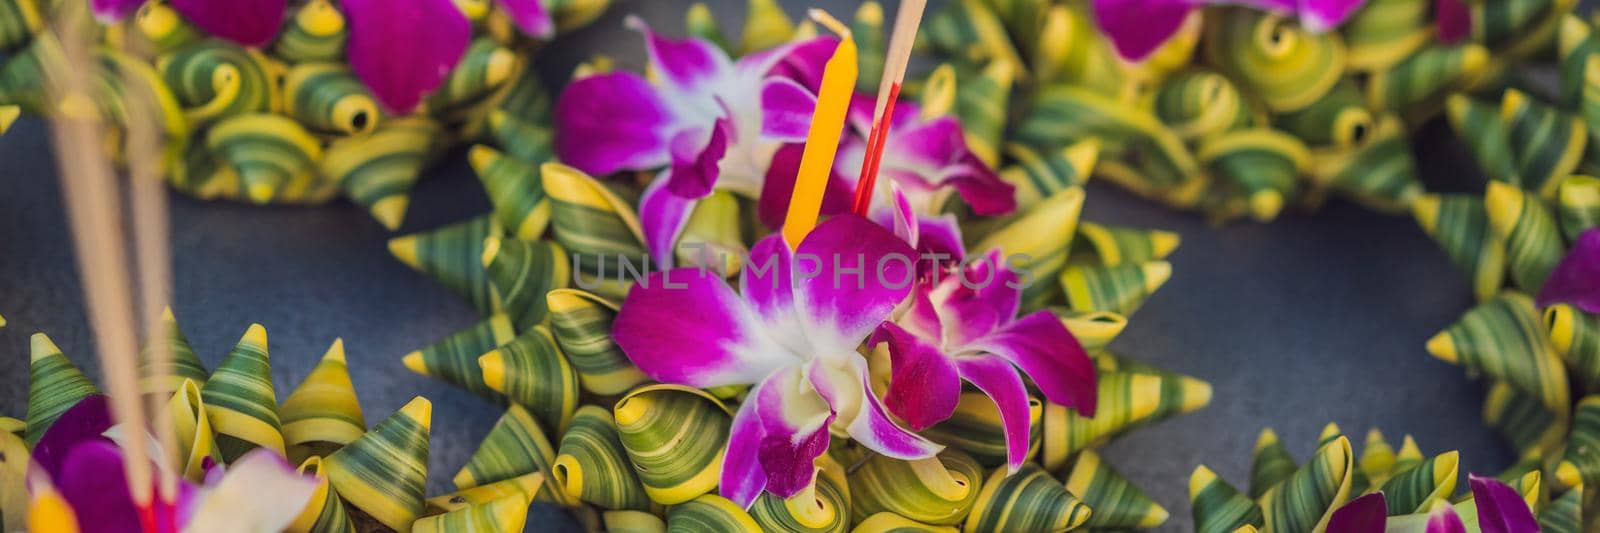 Loy Krathong festival, People buy flowers and candle to light and float on water to celebrate the Loy Krathong festival in Thailand BANNER, LONG FORMAT by galitskaya